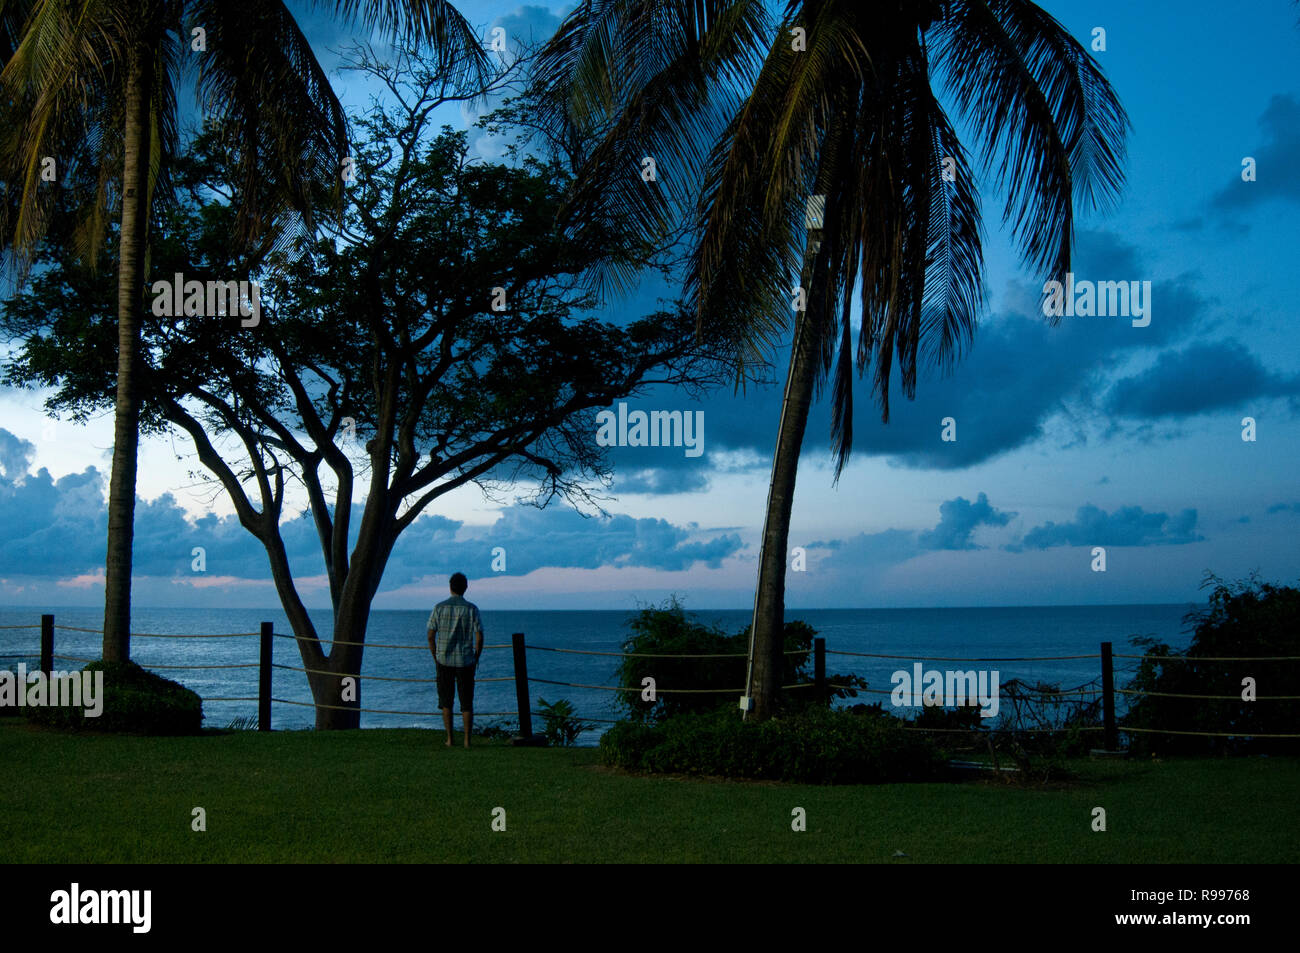 Silhouette of a man standing under trees near the beach of a south island resort in Tobago at sunset admiring the beauty of magnificent landscape. Stock Photo